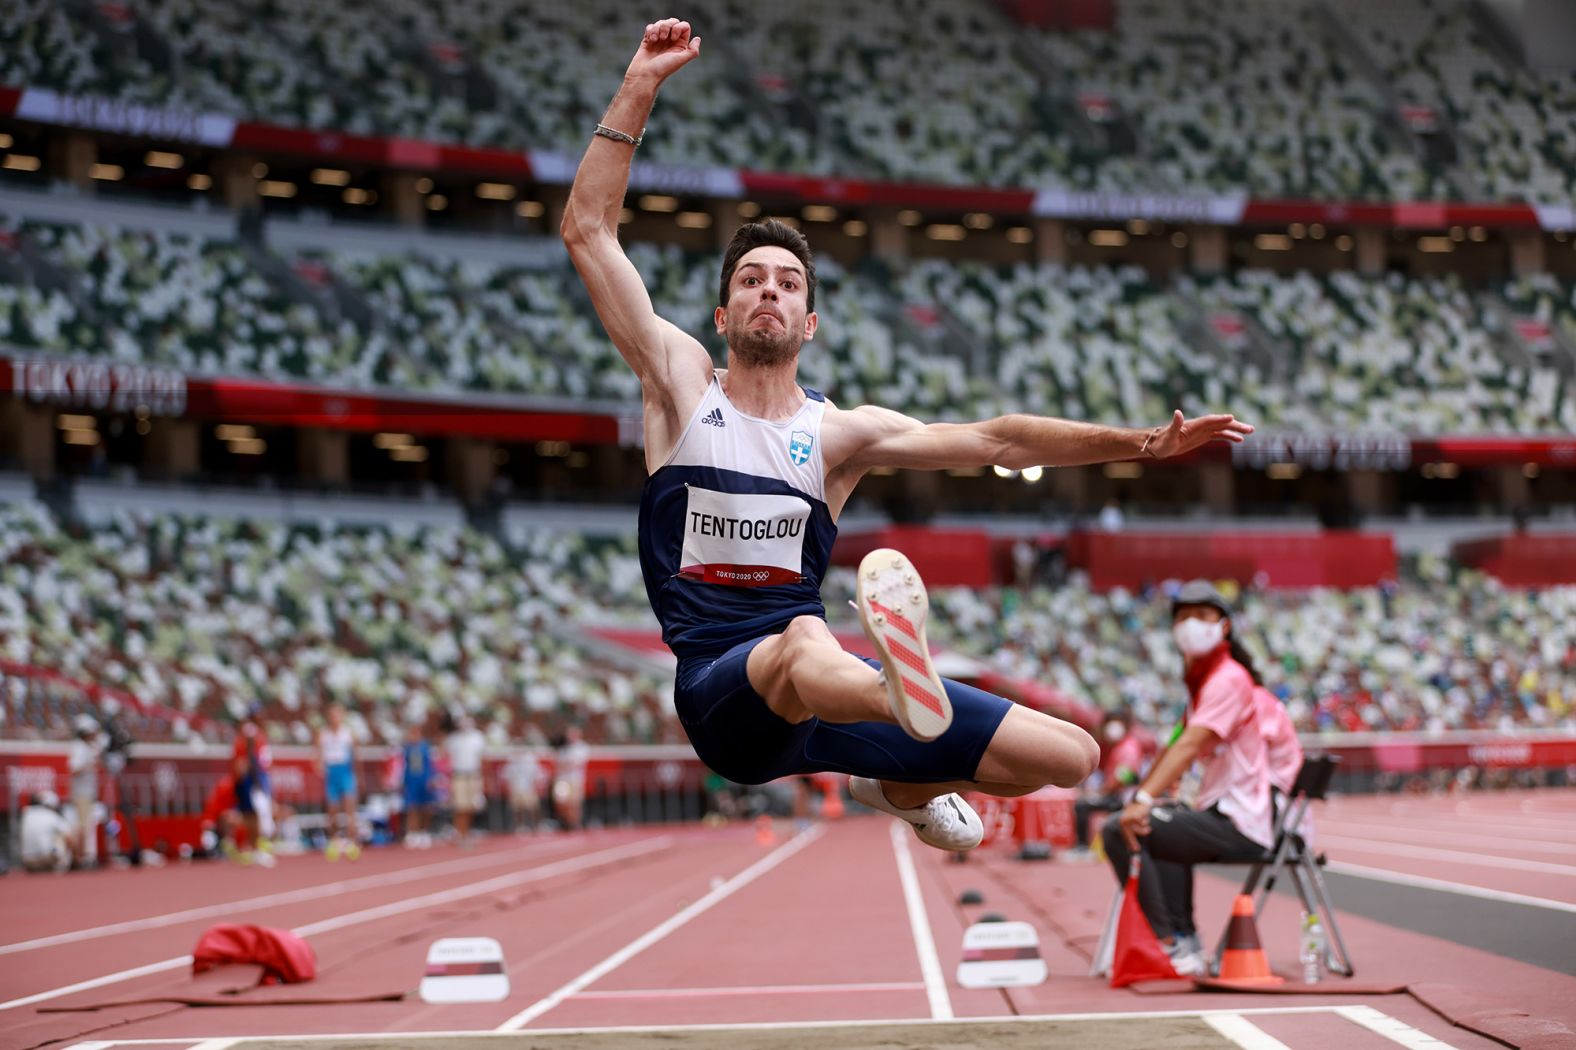 Greece's Miltiadis Tentoglou competes in the long jump on August 2. Both he and Cuba's Juan Miguel Echevarria had a top jump of 8.41 meters, but <a href="index.php?page=&url=https%3A%2F%2Fwww.cnn.com%2Fworld%2Flive-news%2Ftokyo-2020-olympics-08-01-21-spt%2Fh_e020f618747e2ab11a985a7728bfc2e8" target="_blank">Tentoglou won the gold medal</a> because his second-best jump was longer than Echevarria's.